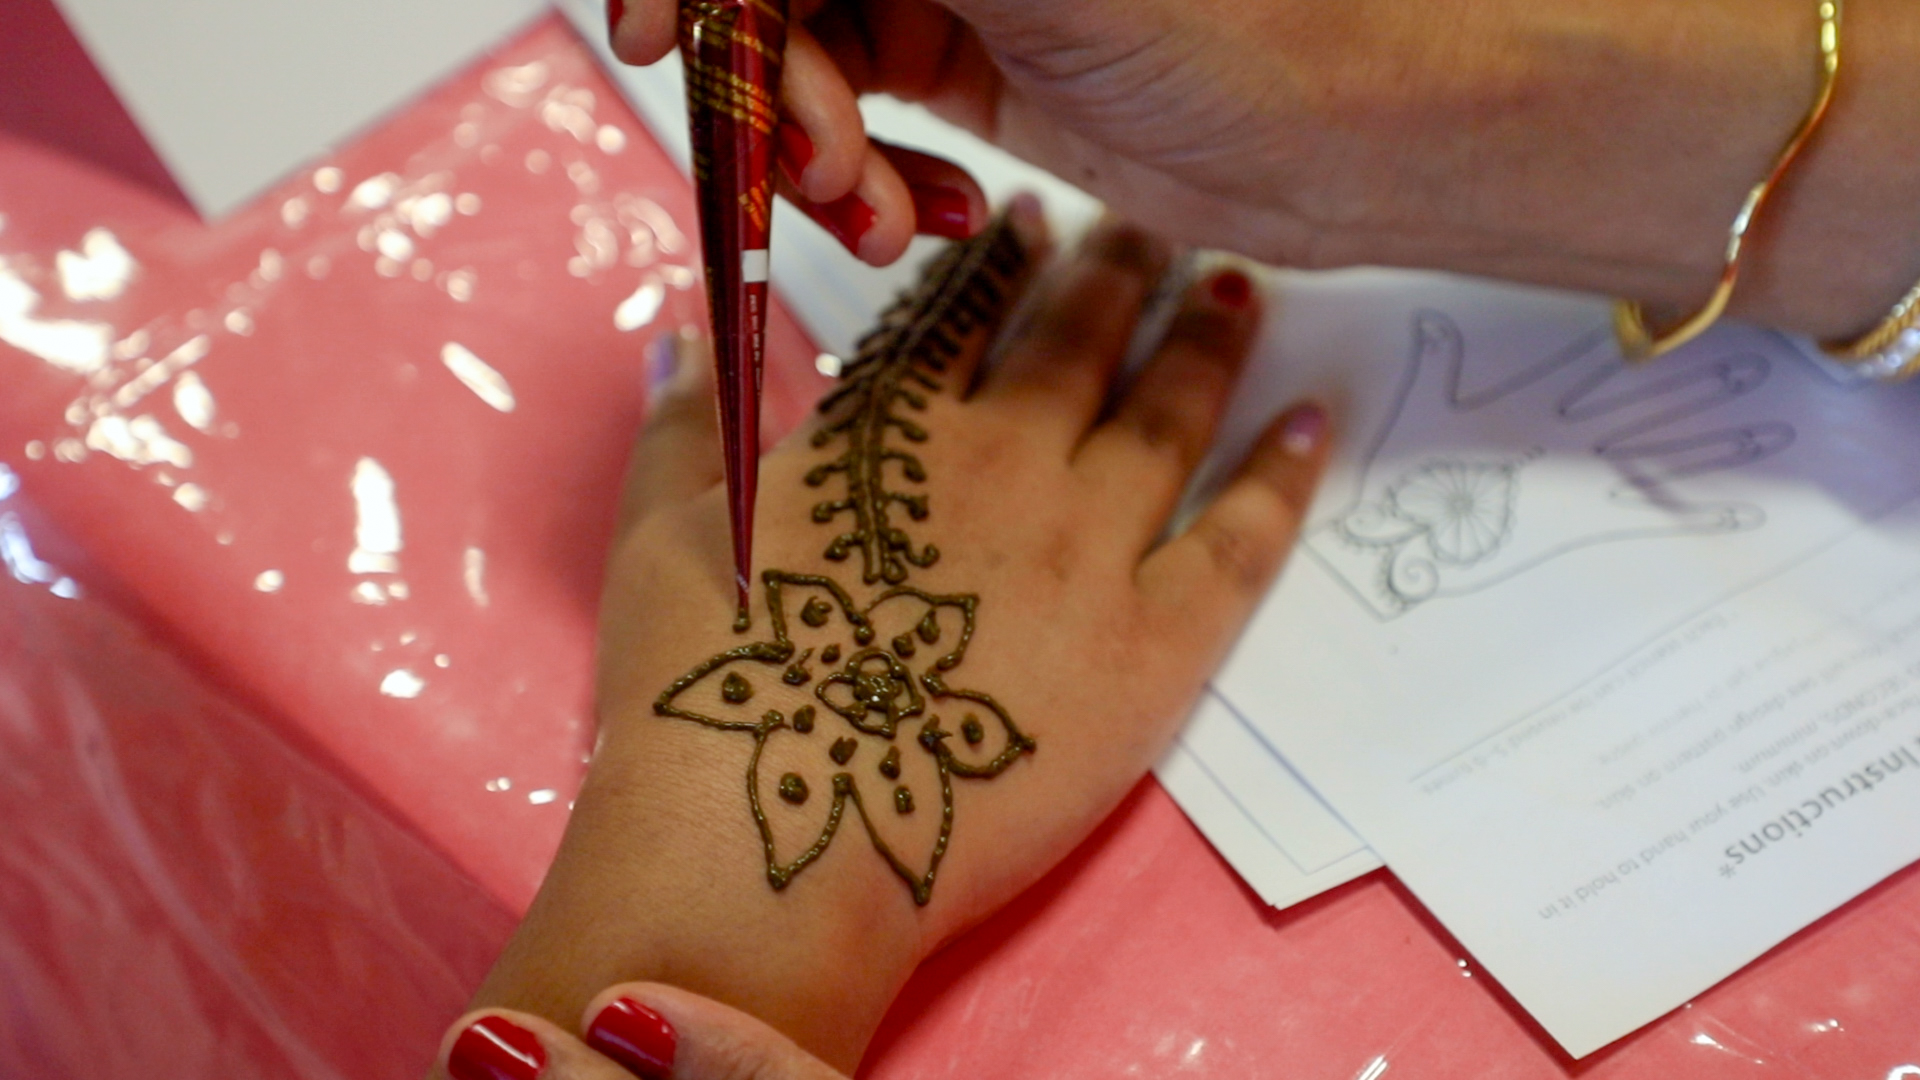 A flower design being painted onto a student's hand with mehndi.